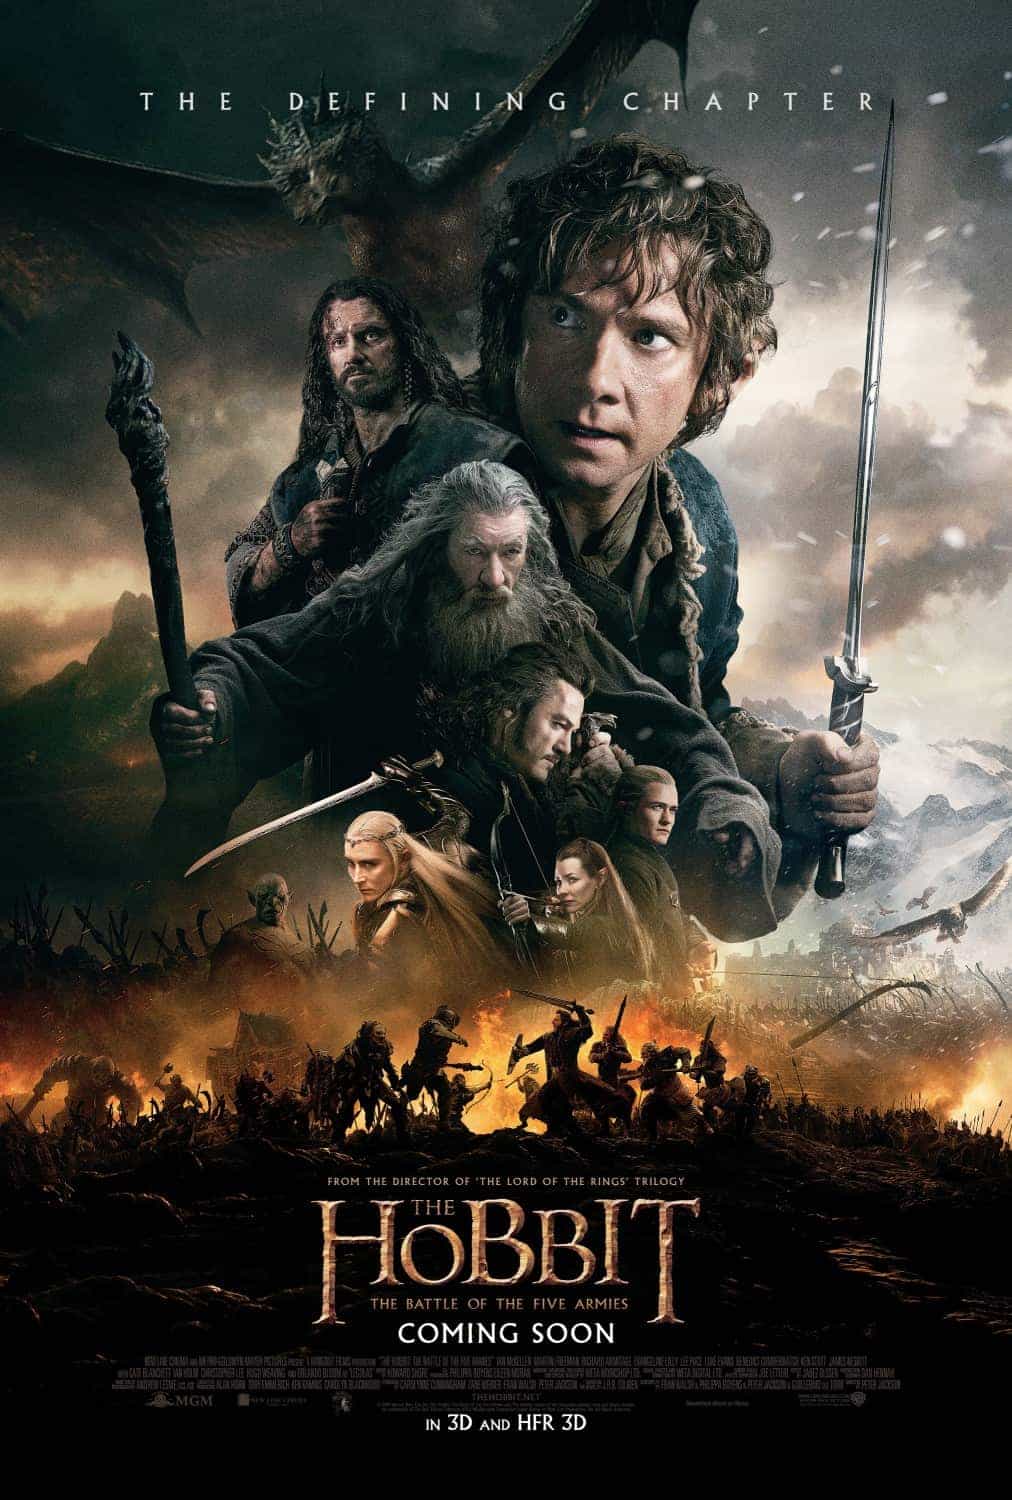 US box office report 19th December 2014: The Hobbit takes a final bow at the top